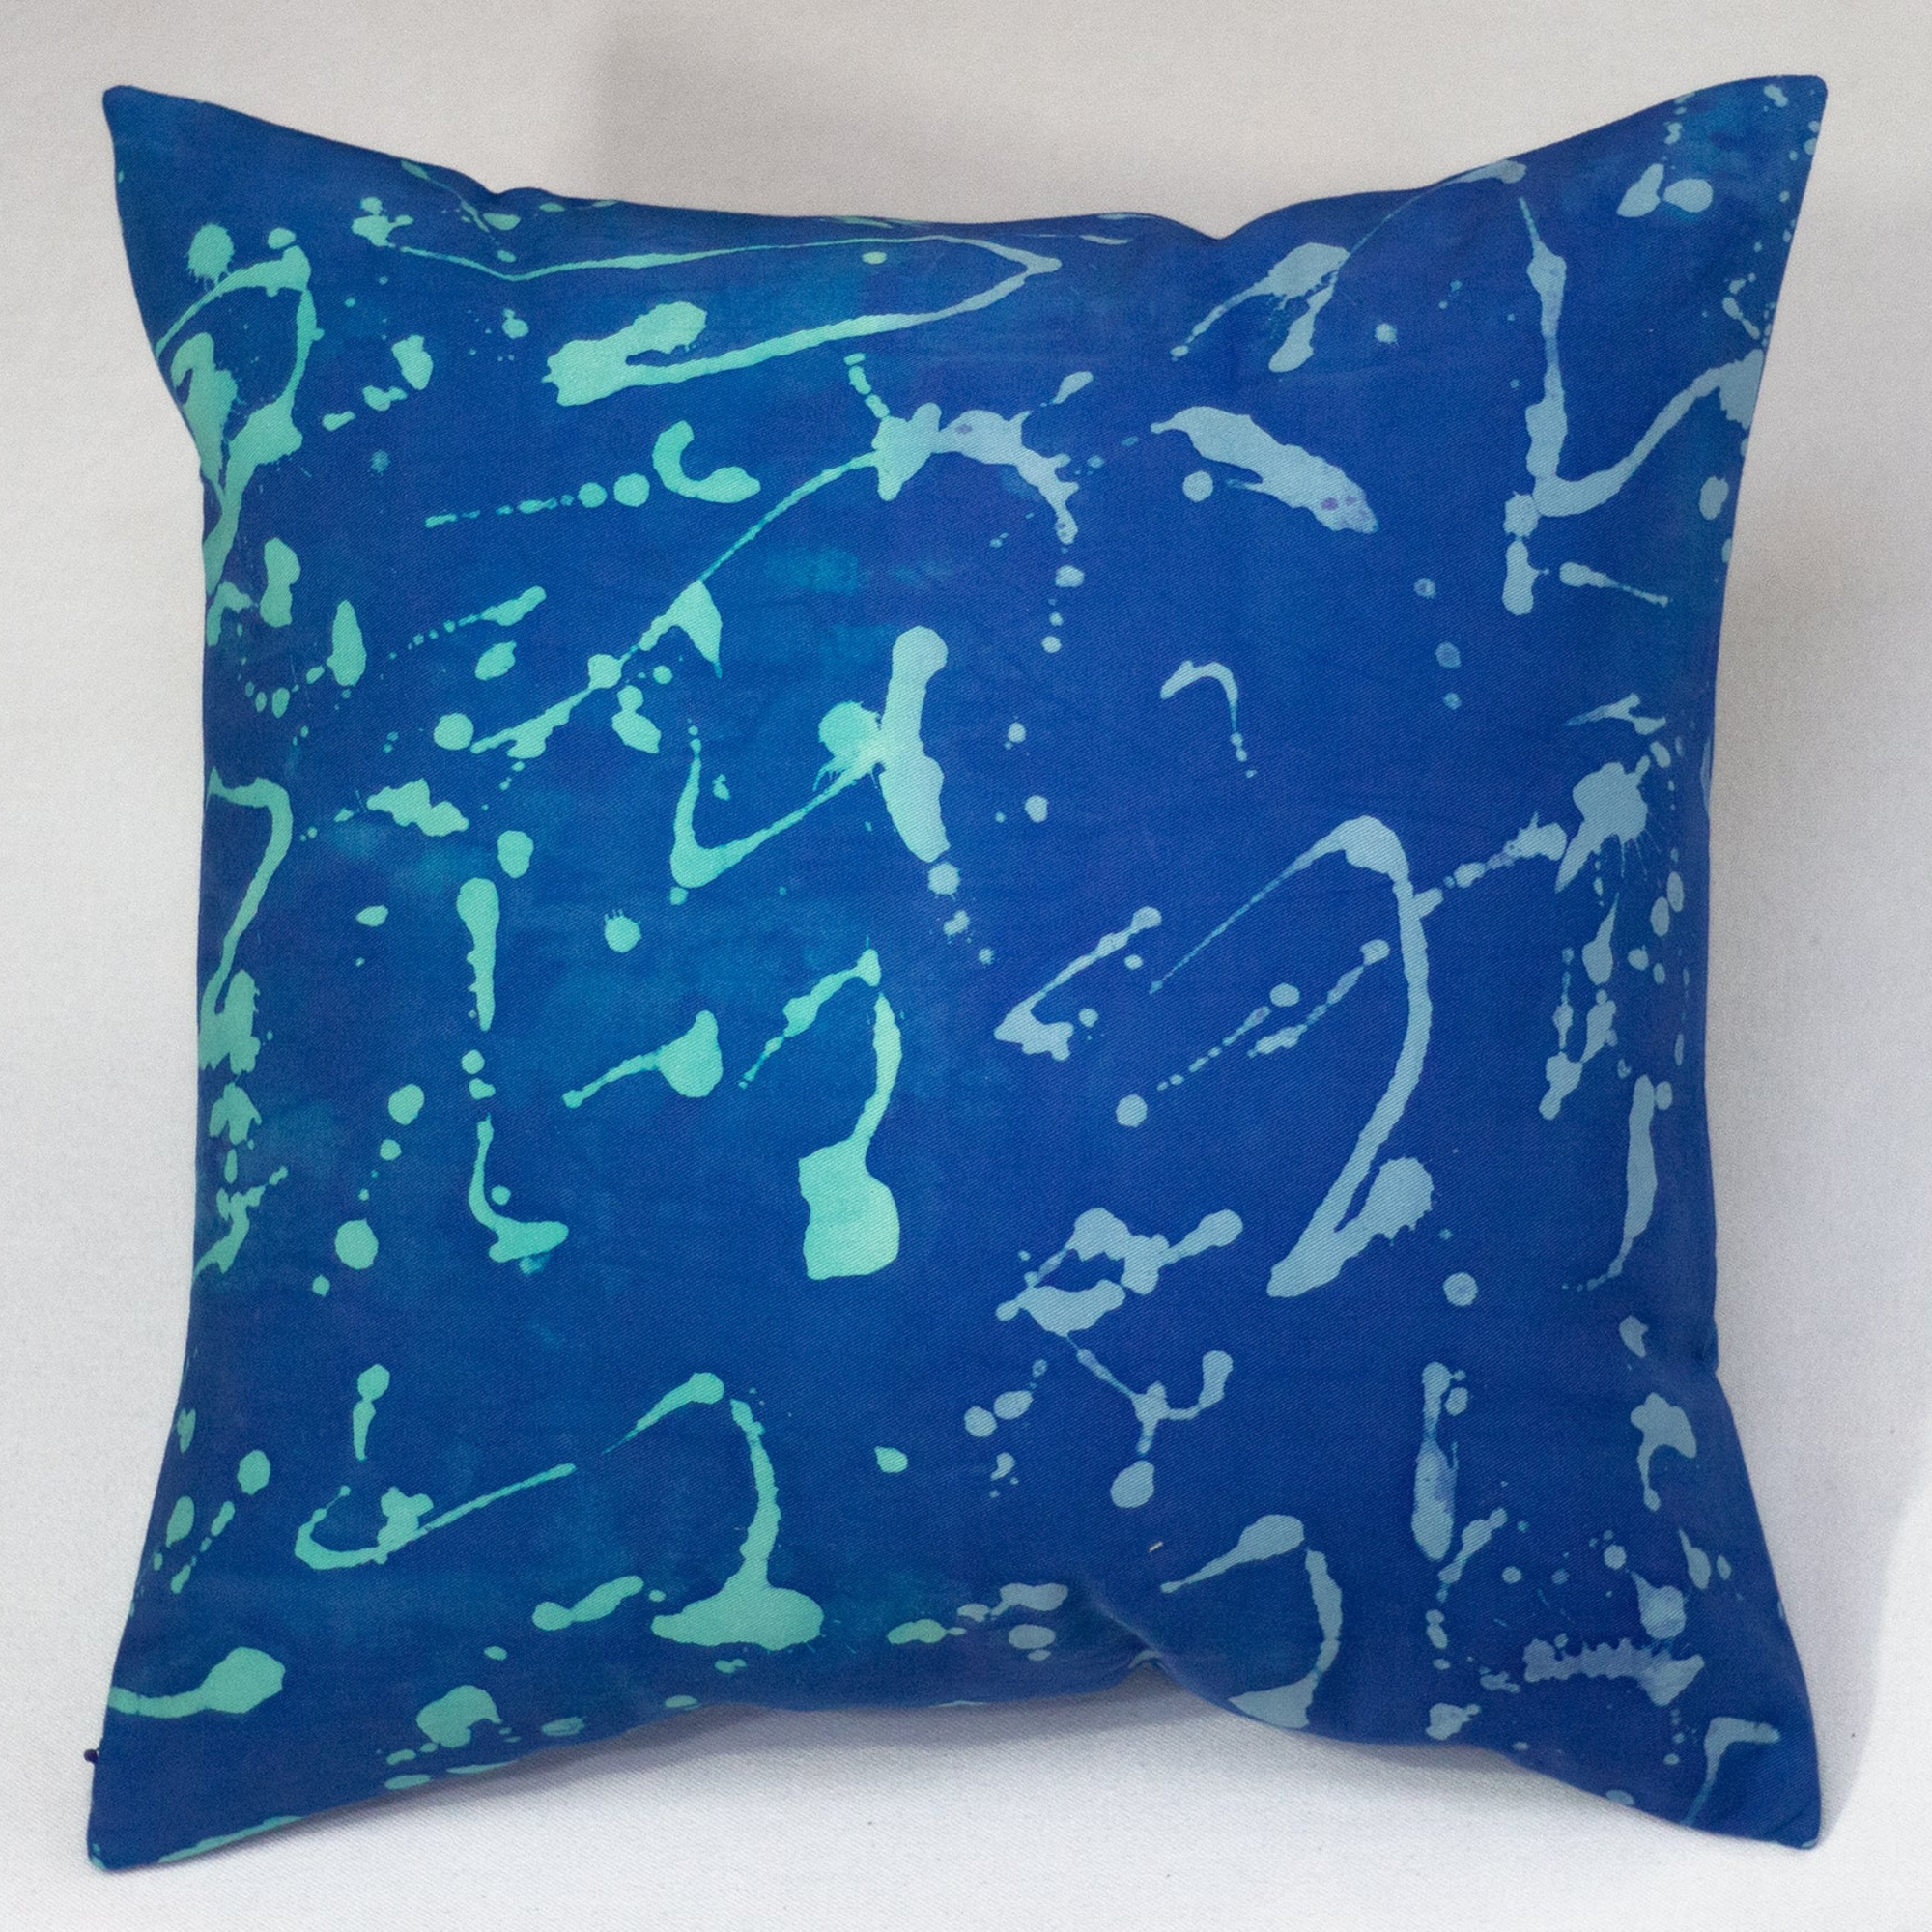 Hand Painted Accent Pillow Cover - Blue Lightning